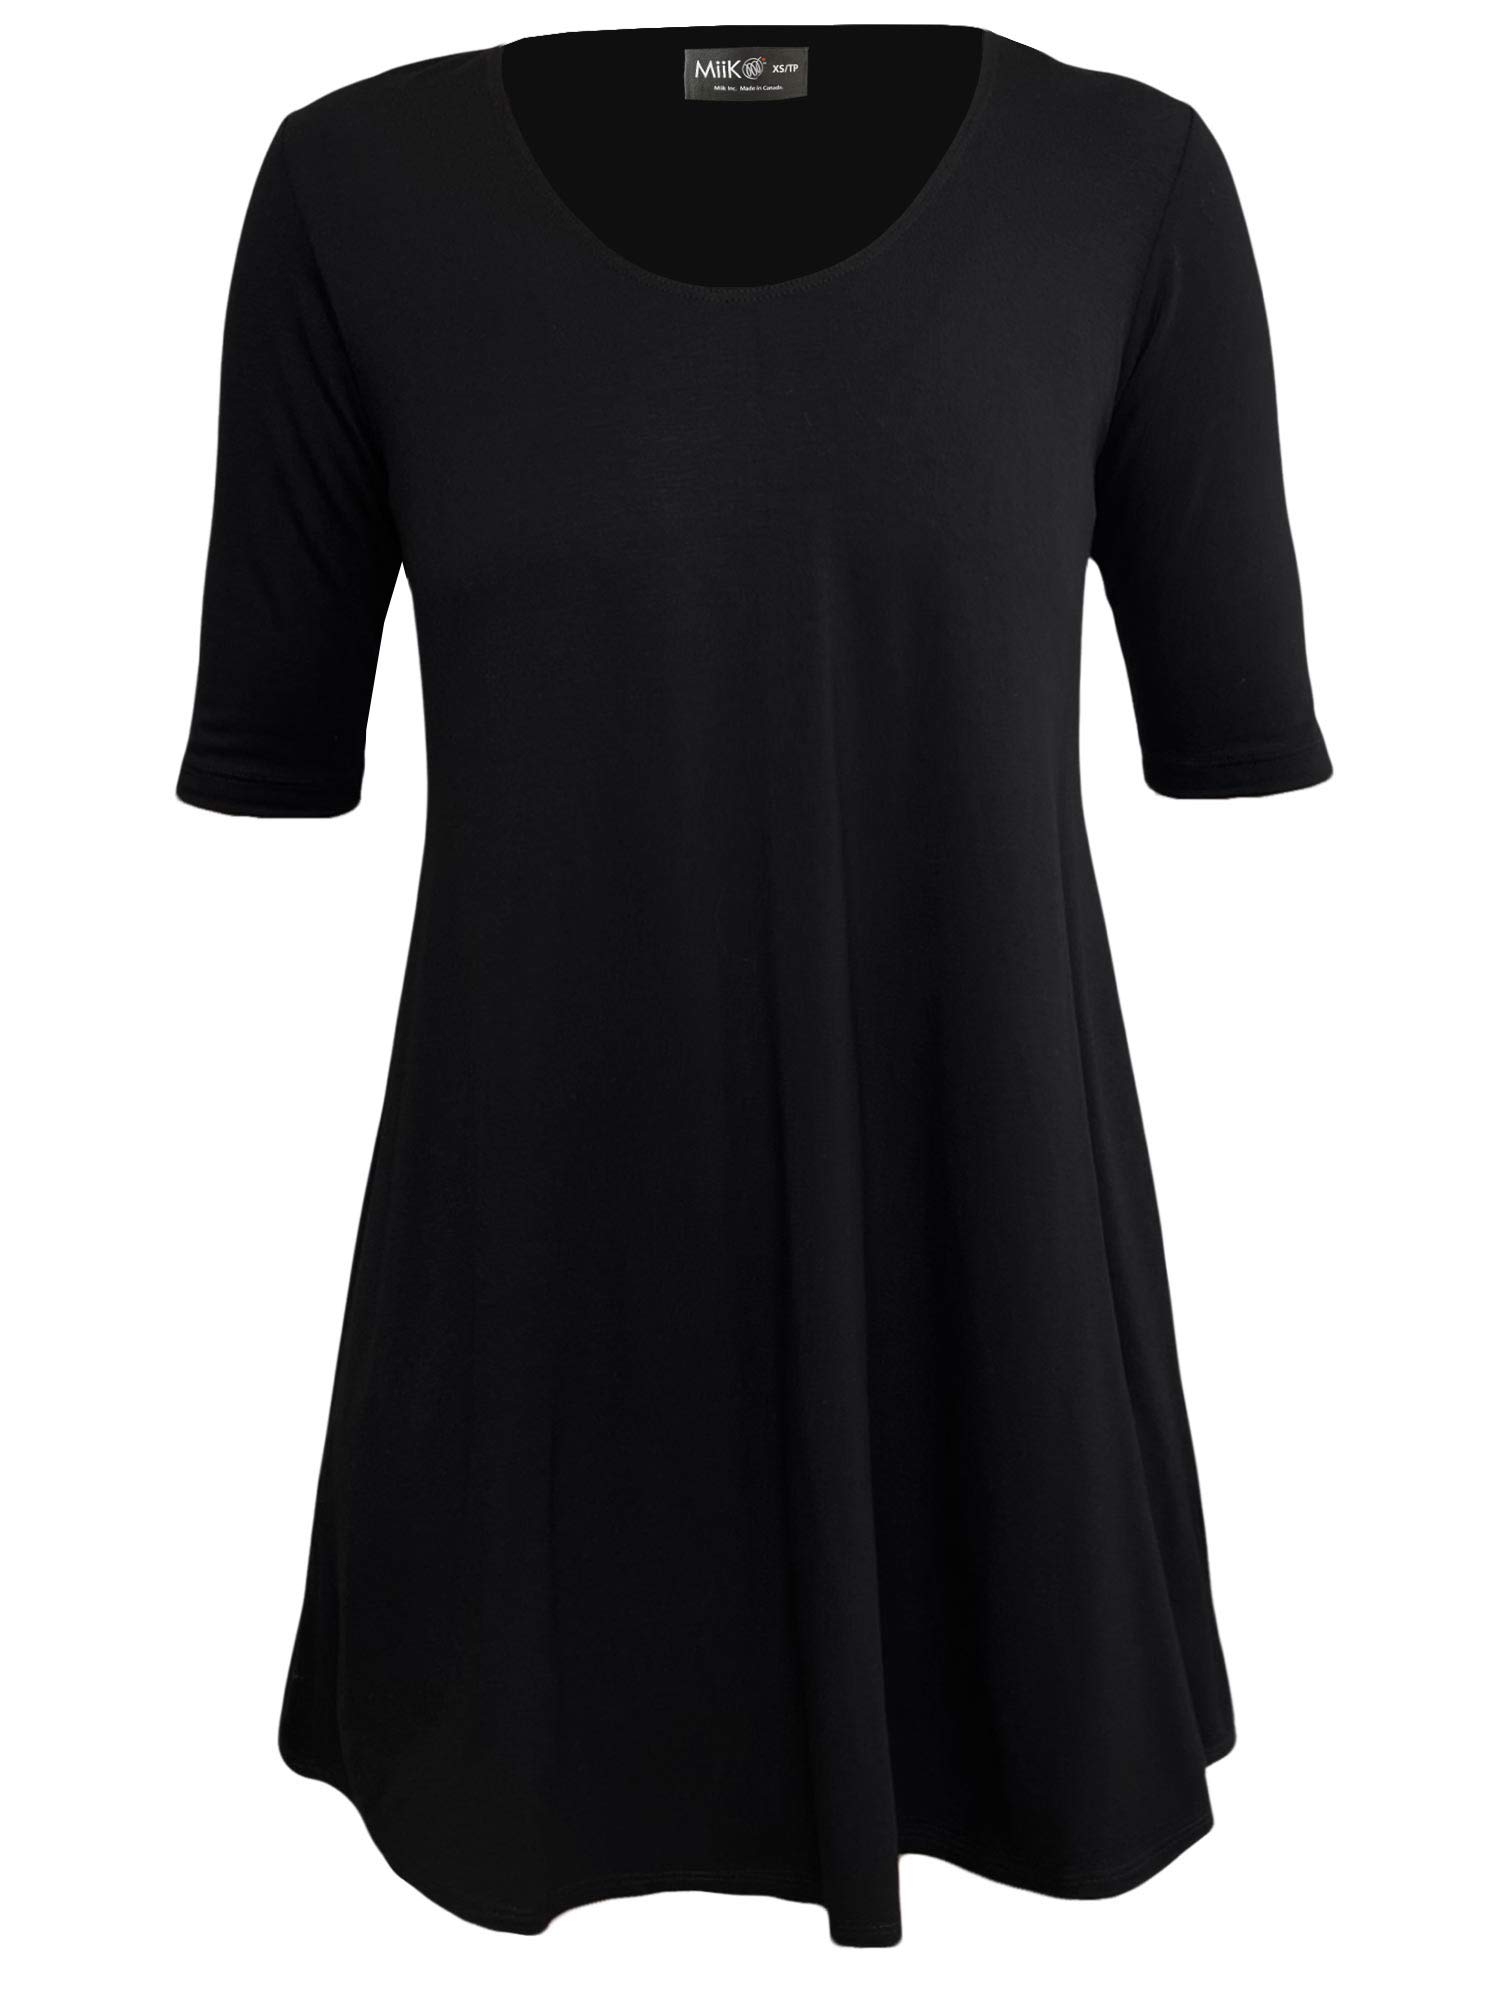 Rocelle half-sleeve scoop neck tunic | Sustainable women's fashion made ...